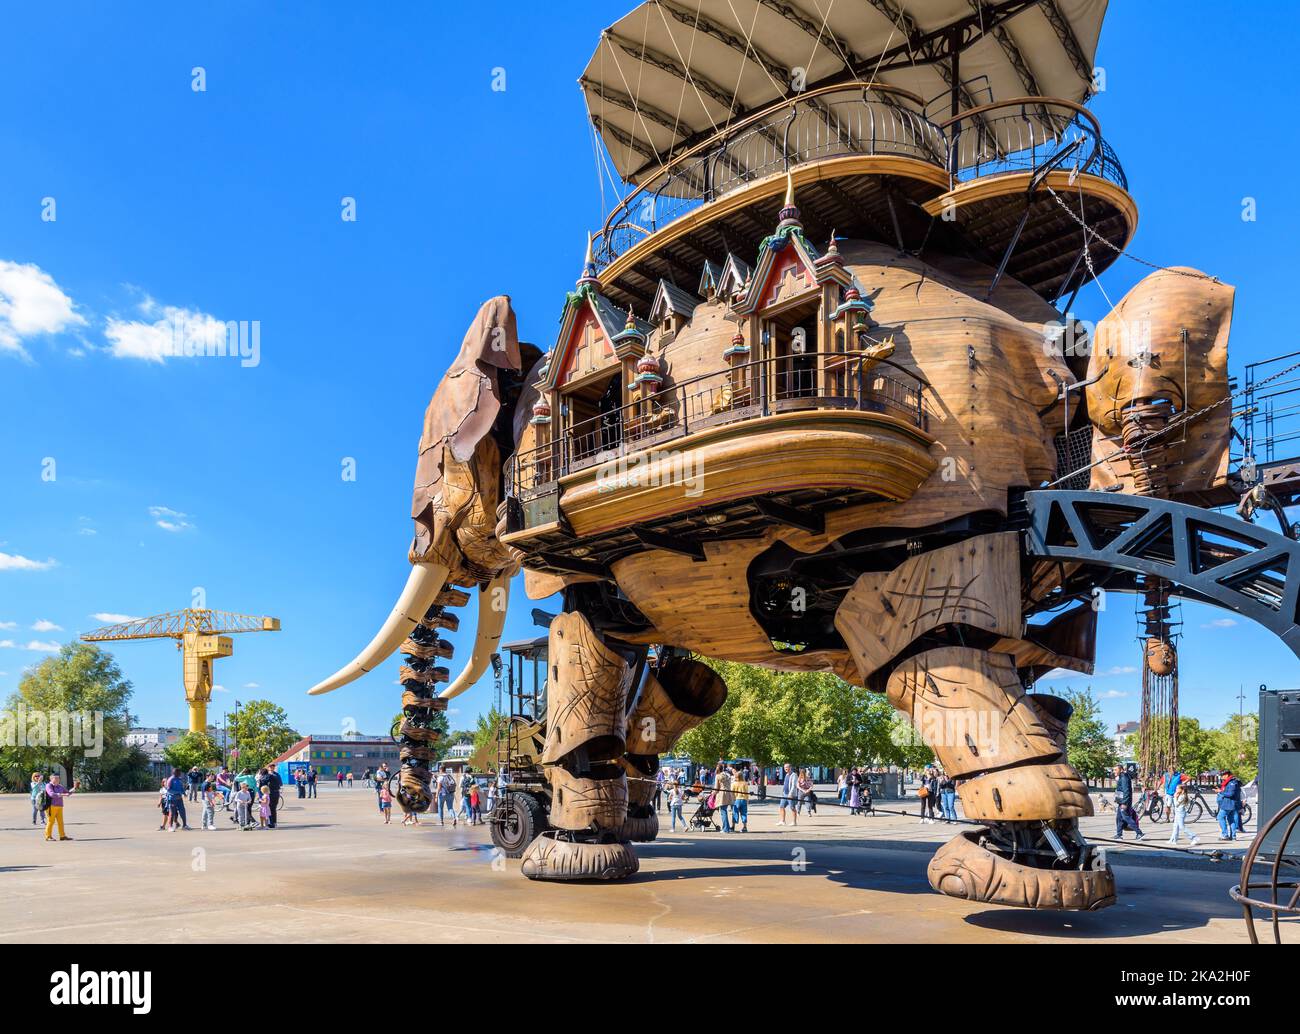 The Great Elephant giant puppet, part of the Machines of the Isle of Nantes attraction, with the yellow Titan crane in the distance. Stock Photo